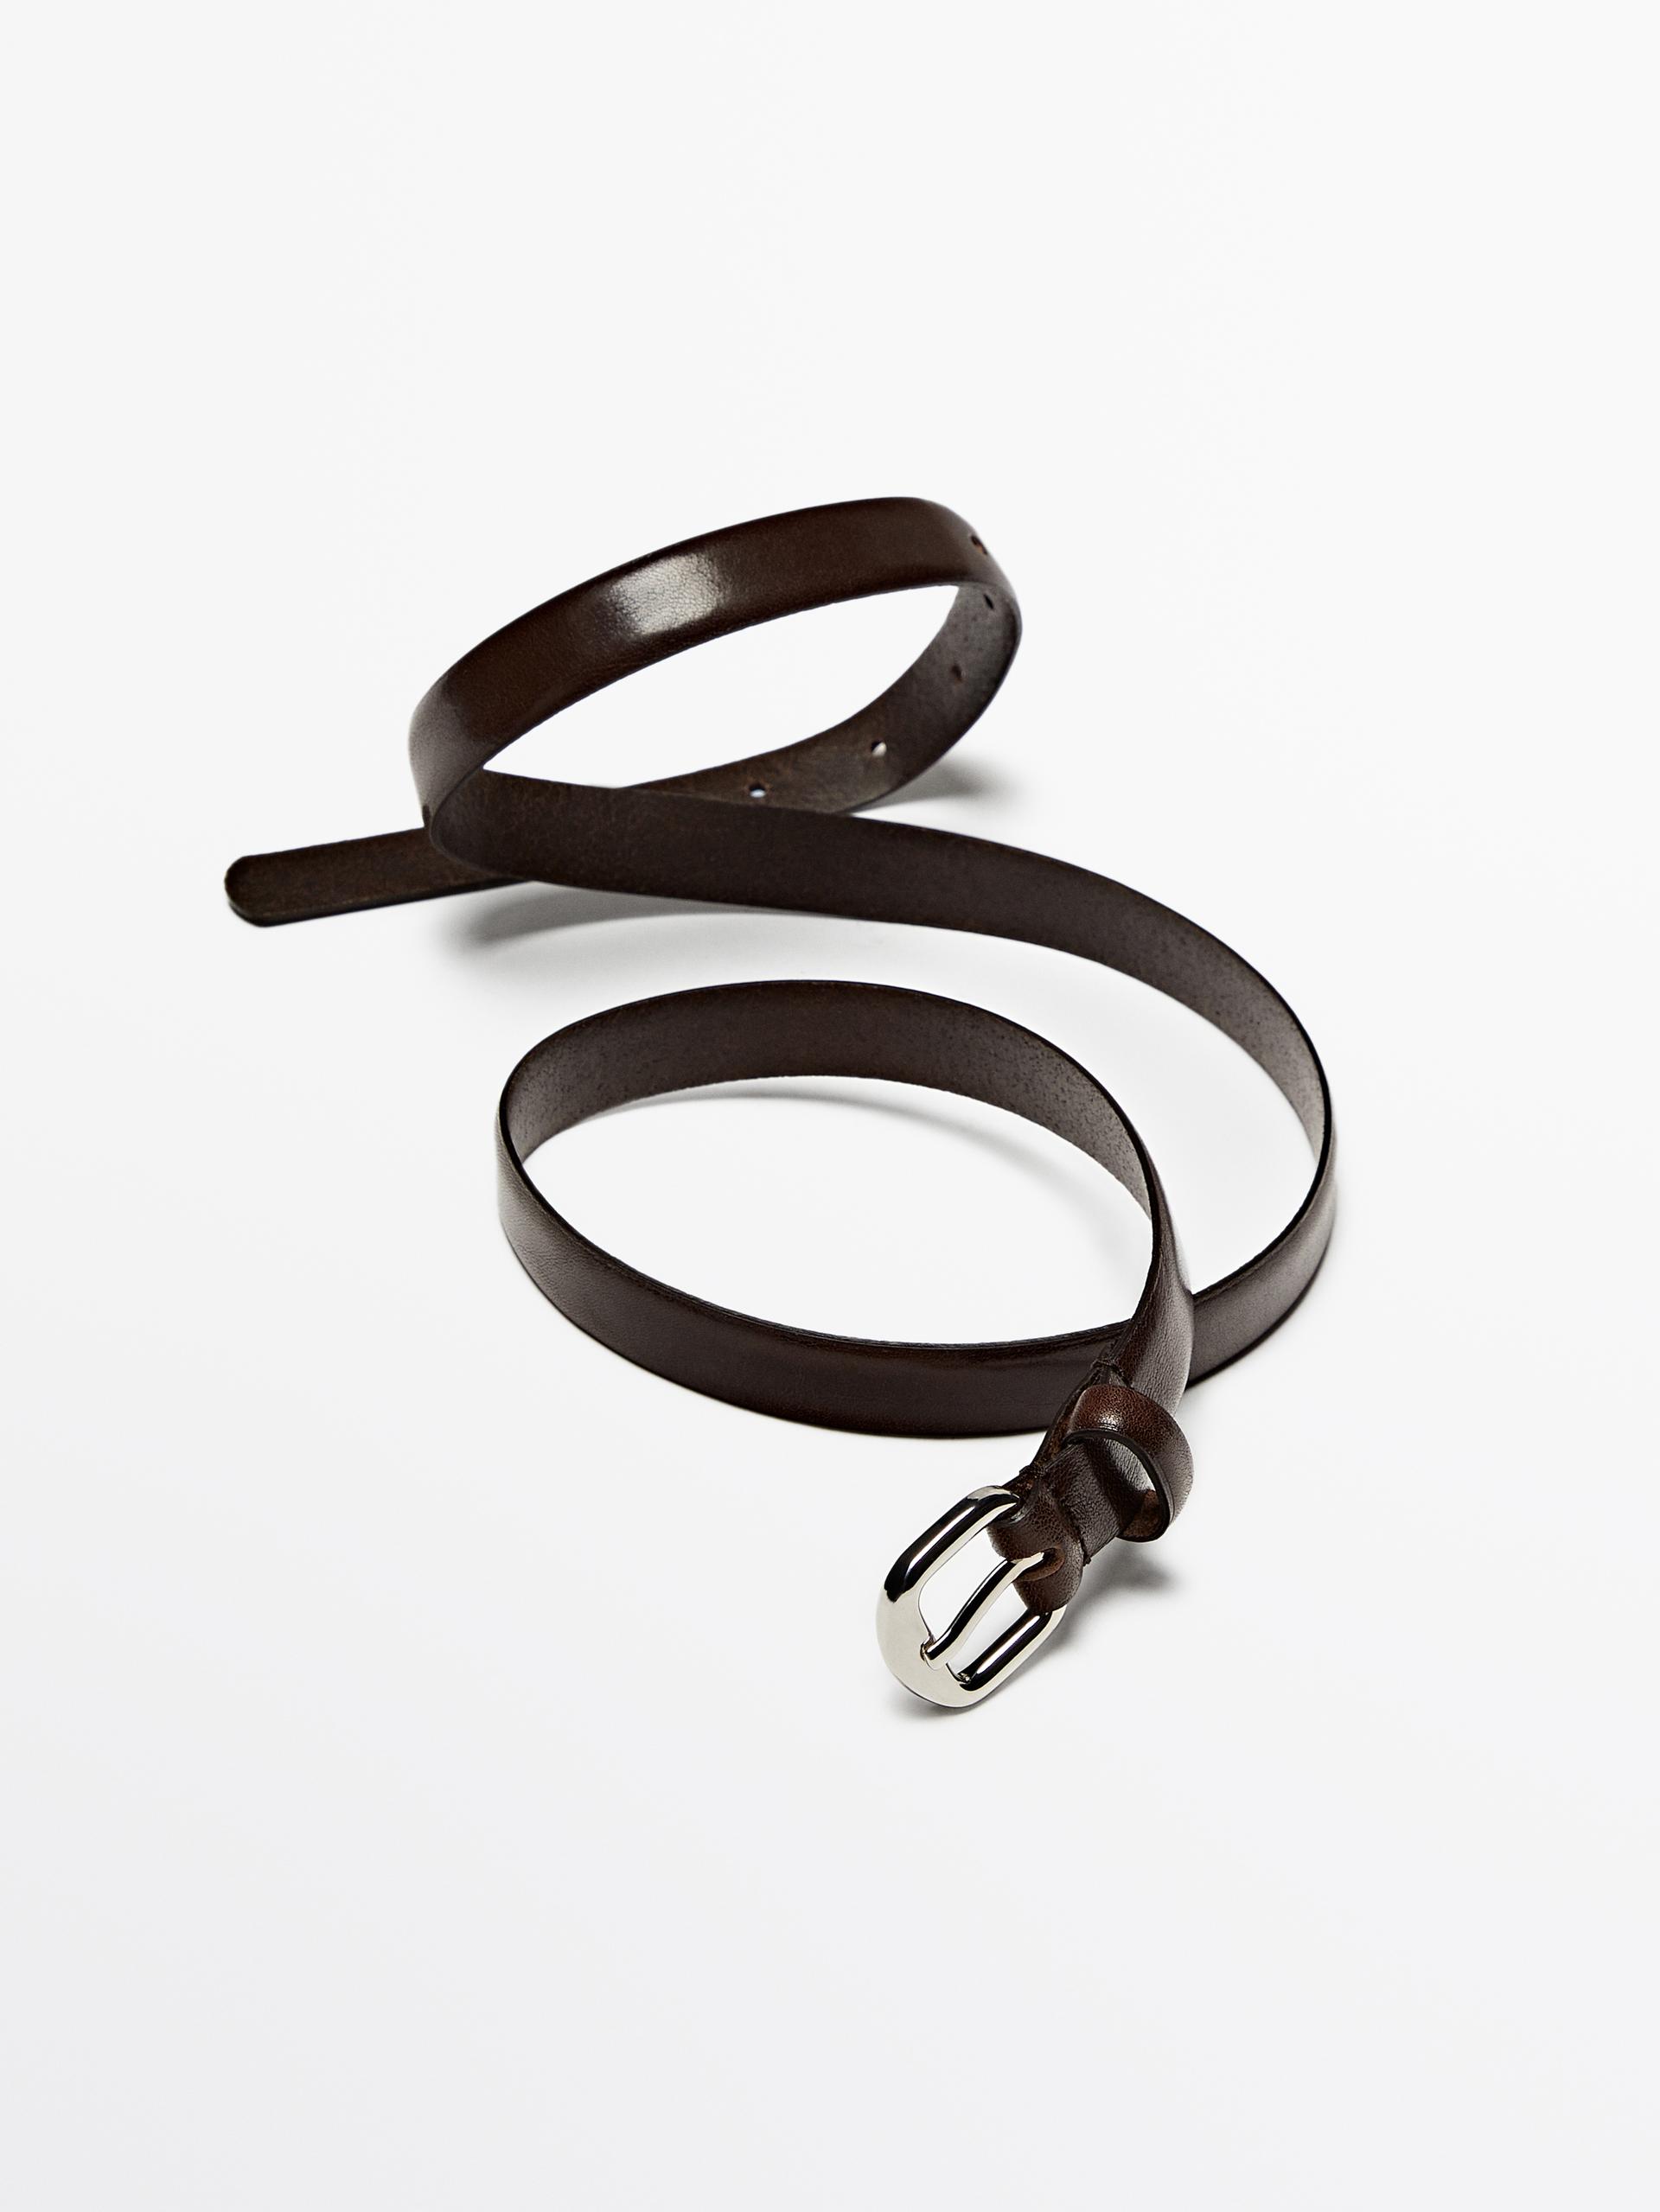 Leather belt with round buckle - Sand